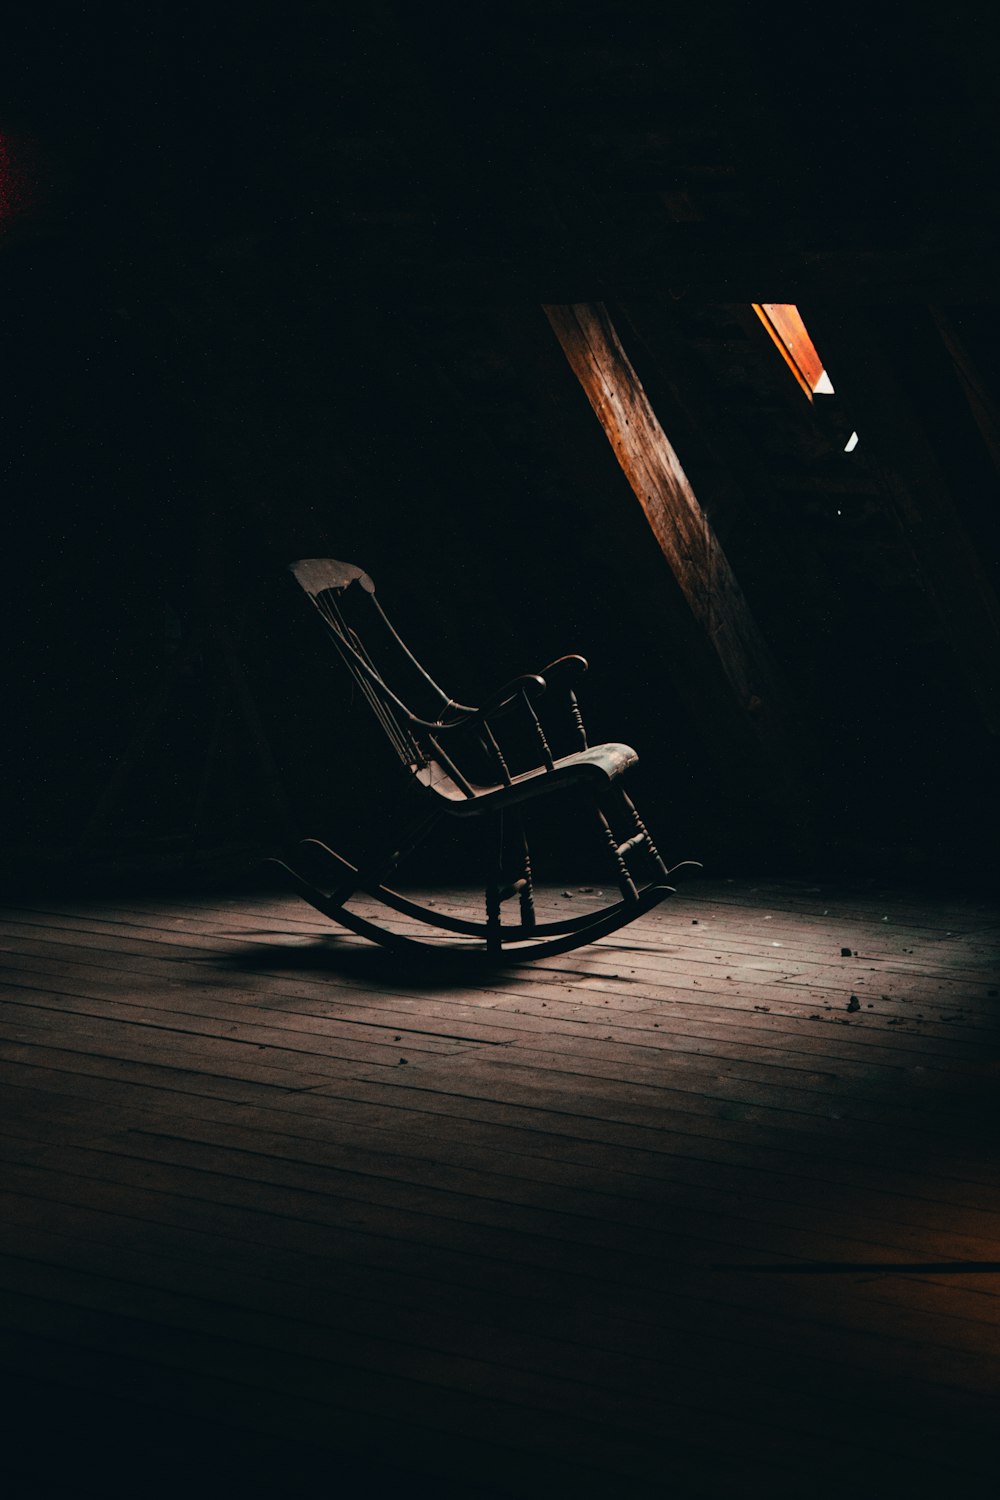 a rocking chair on a wooden floor in a dark room